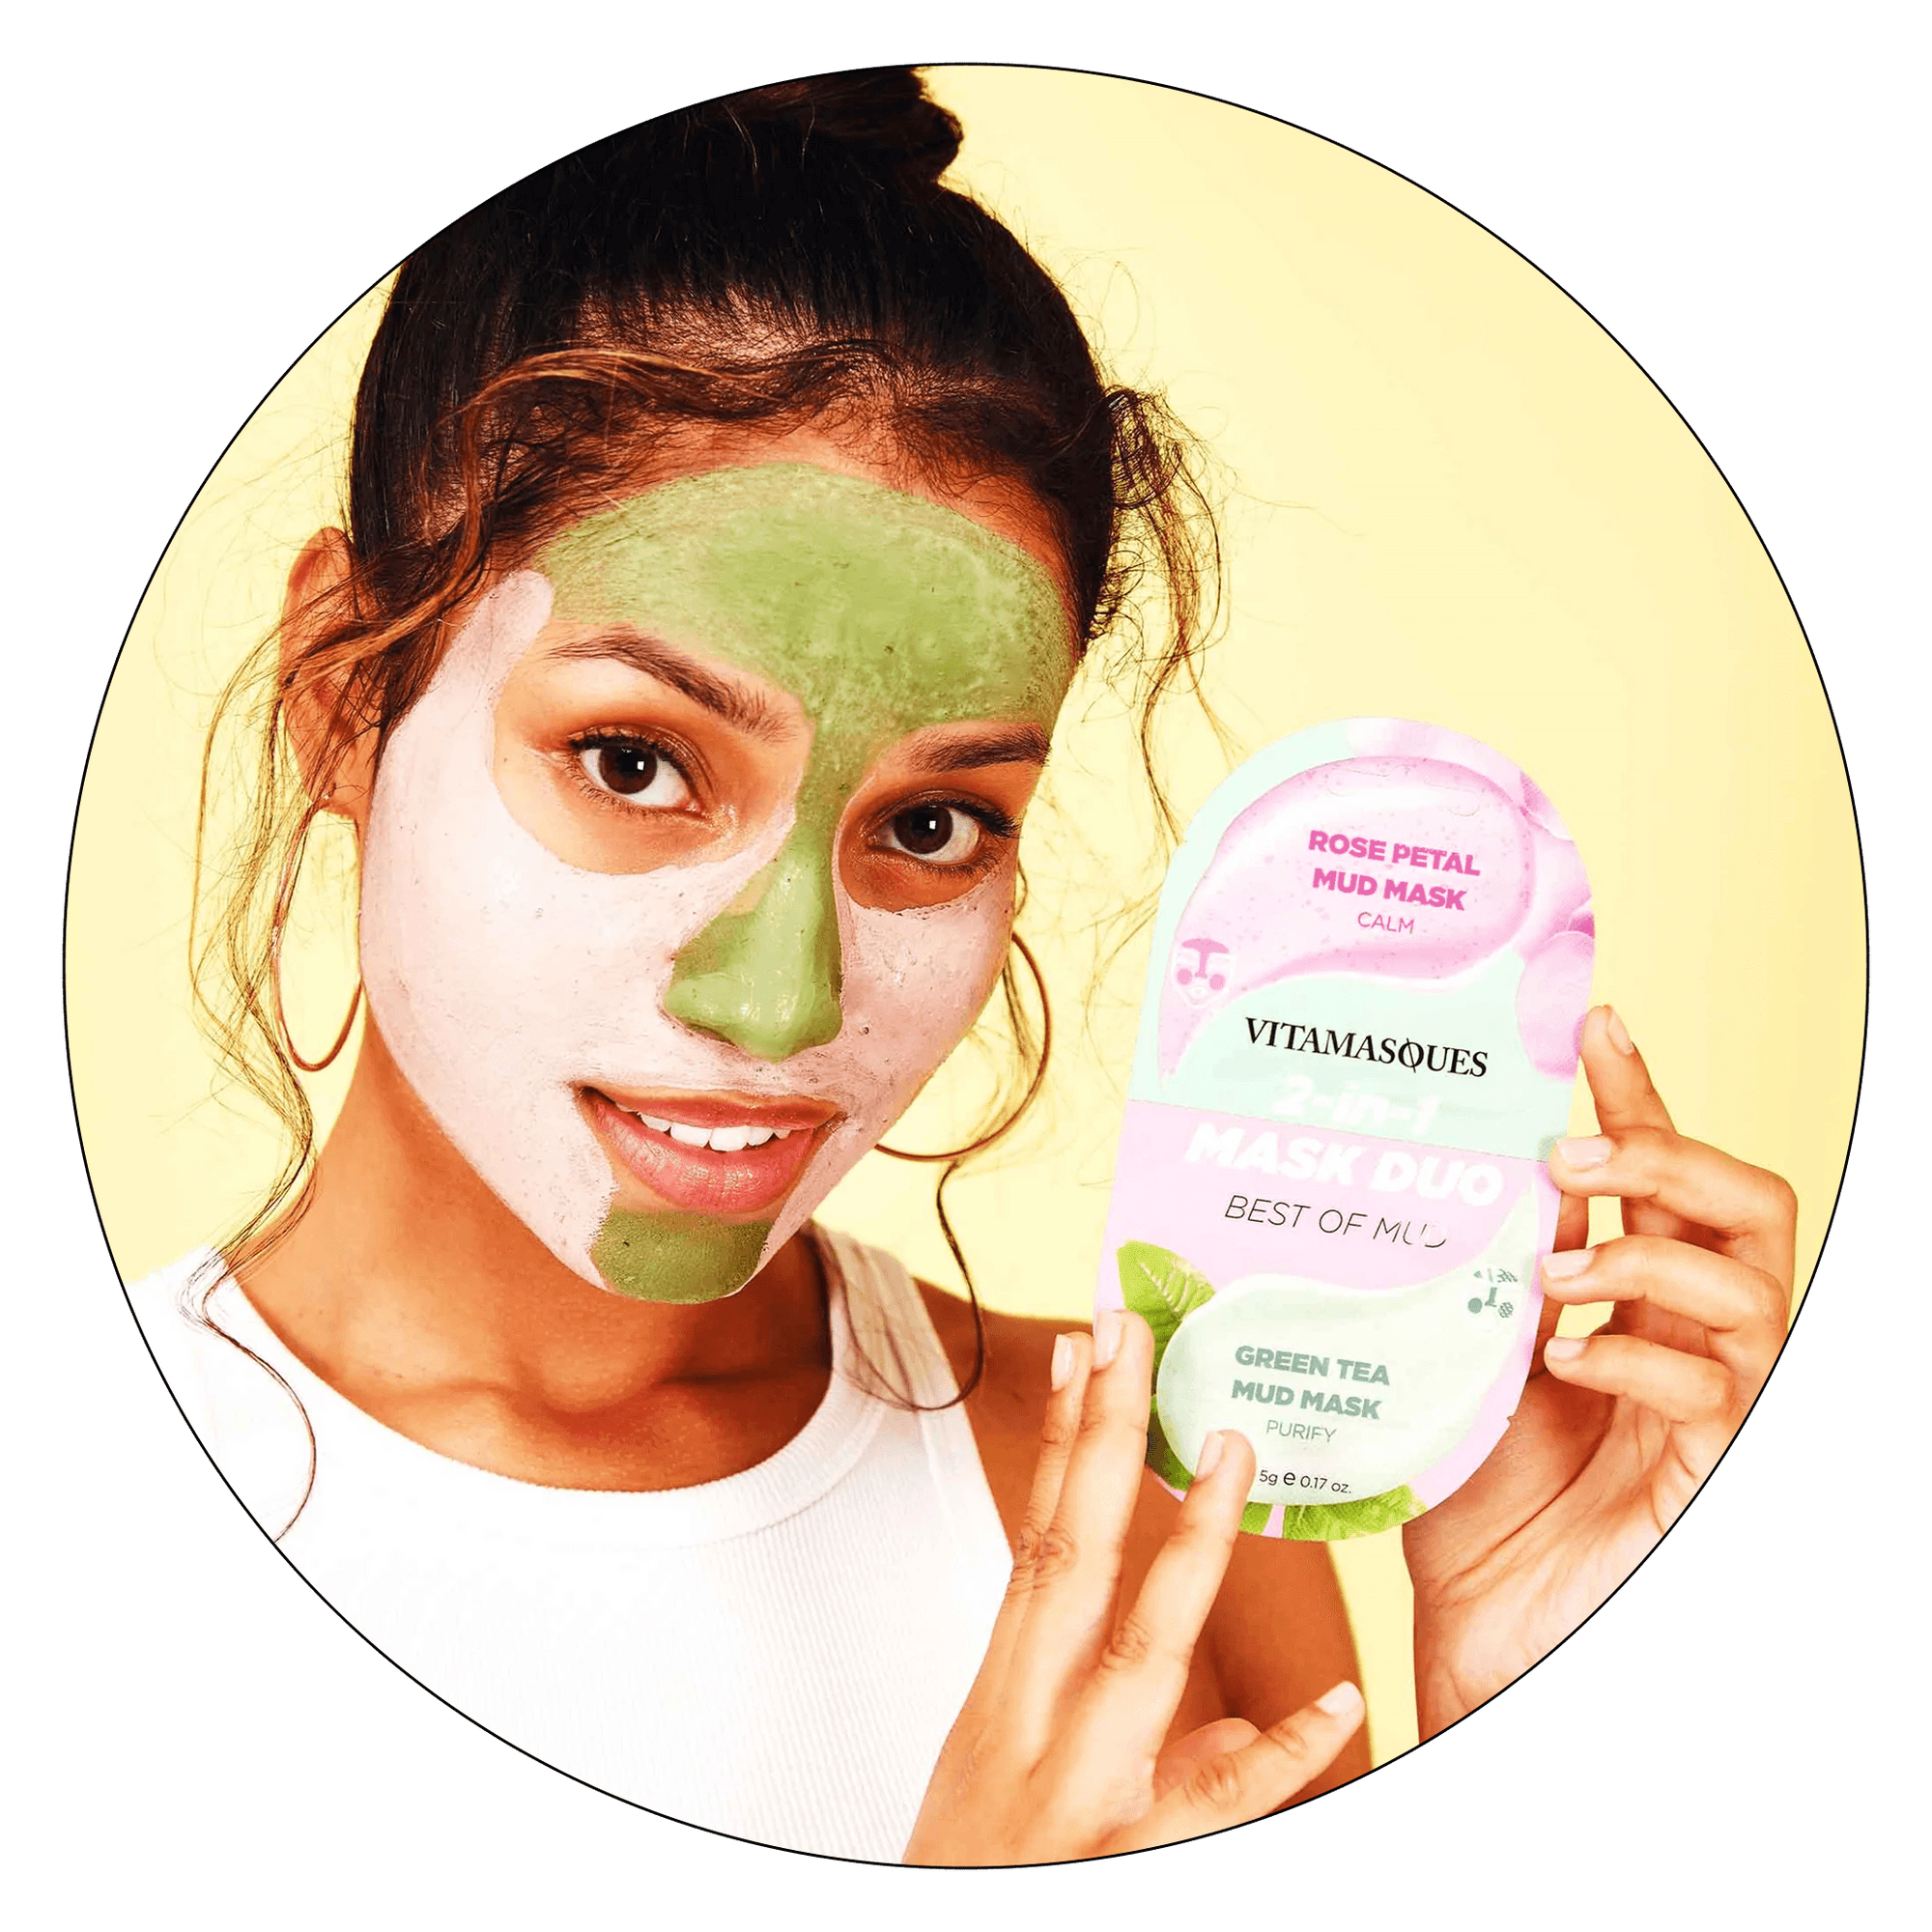 2-in-1 Mask Duo: Best Of Mud Mask - Vitamasques